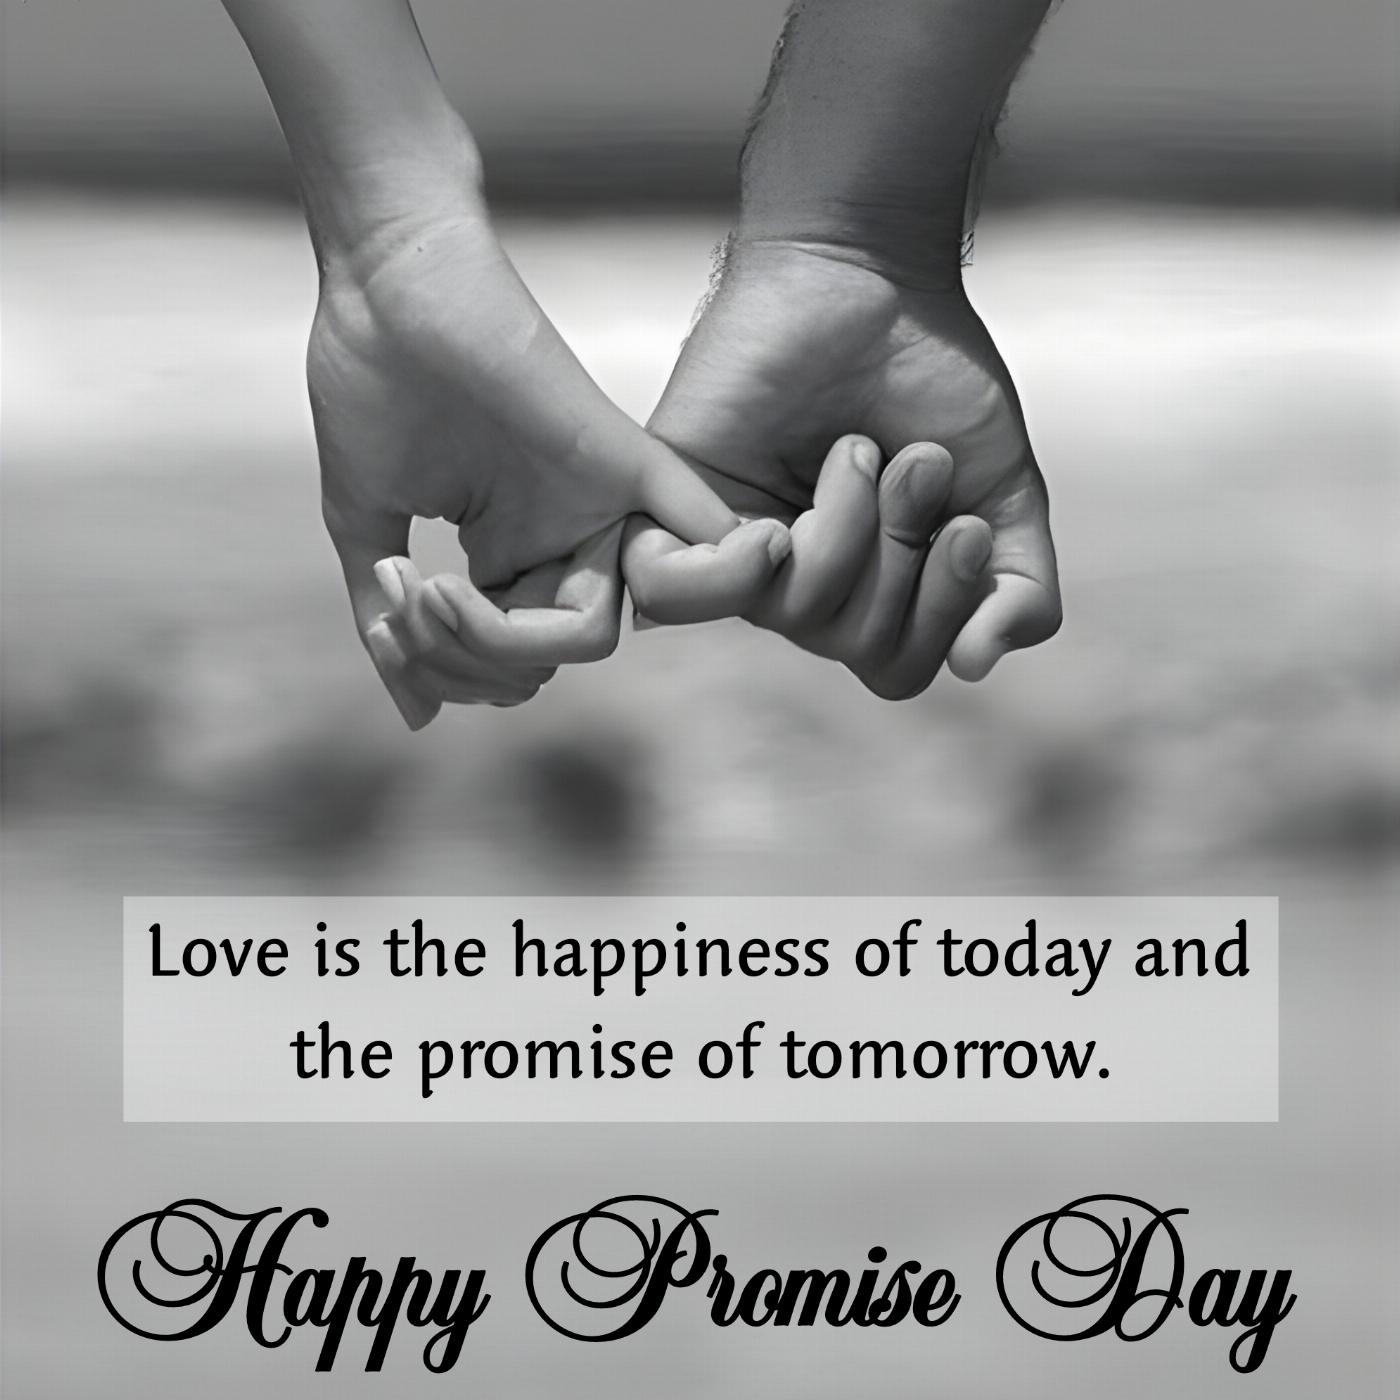 Love is the happiness of today and the promise of tomorrow